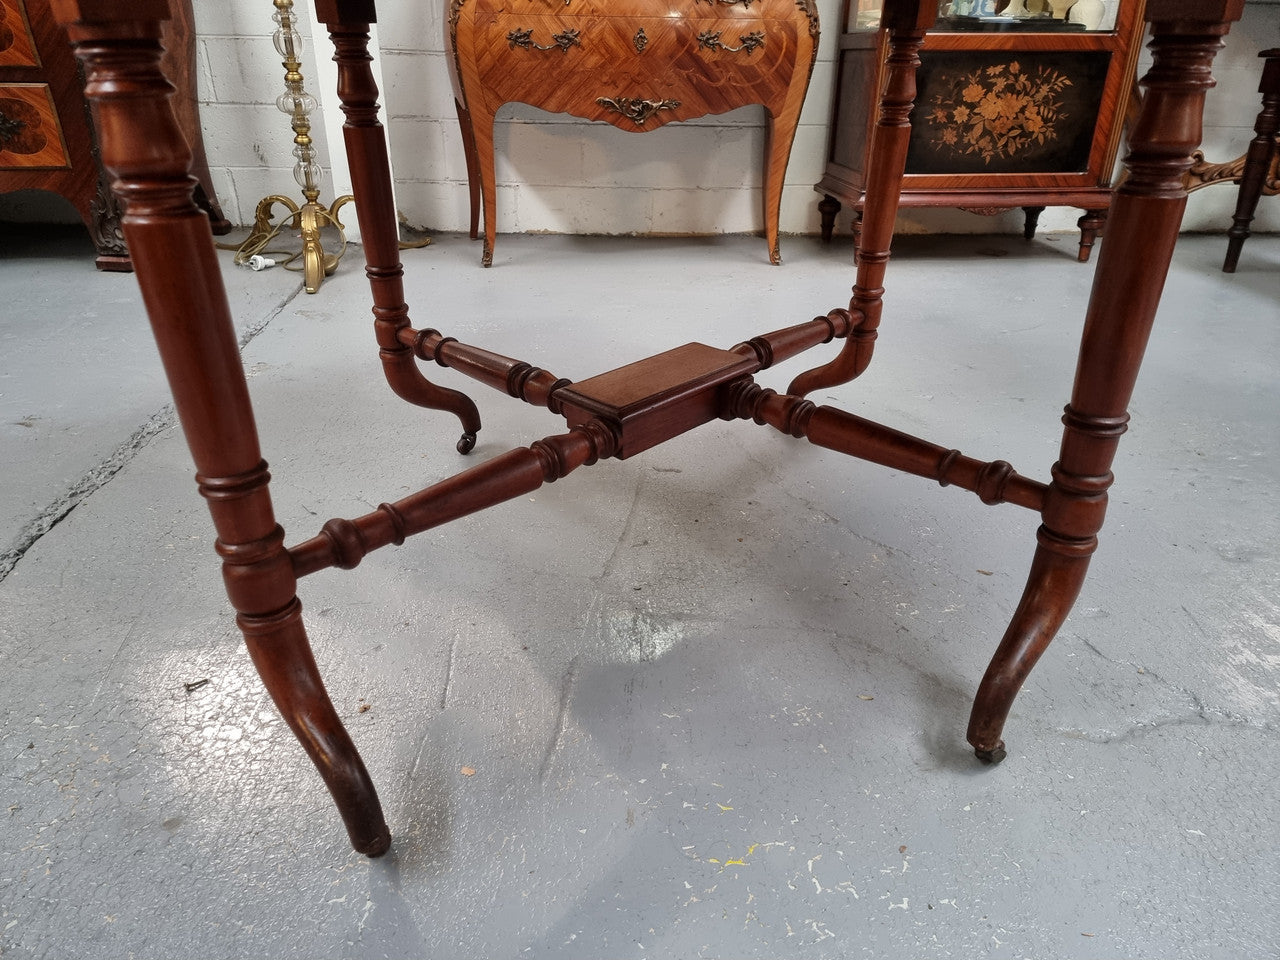 Beautiful Antique Mahogany Sutherland table / extension table on castors in good original detailed condition